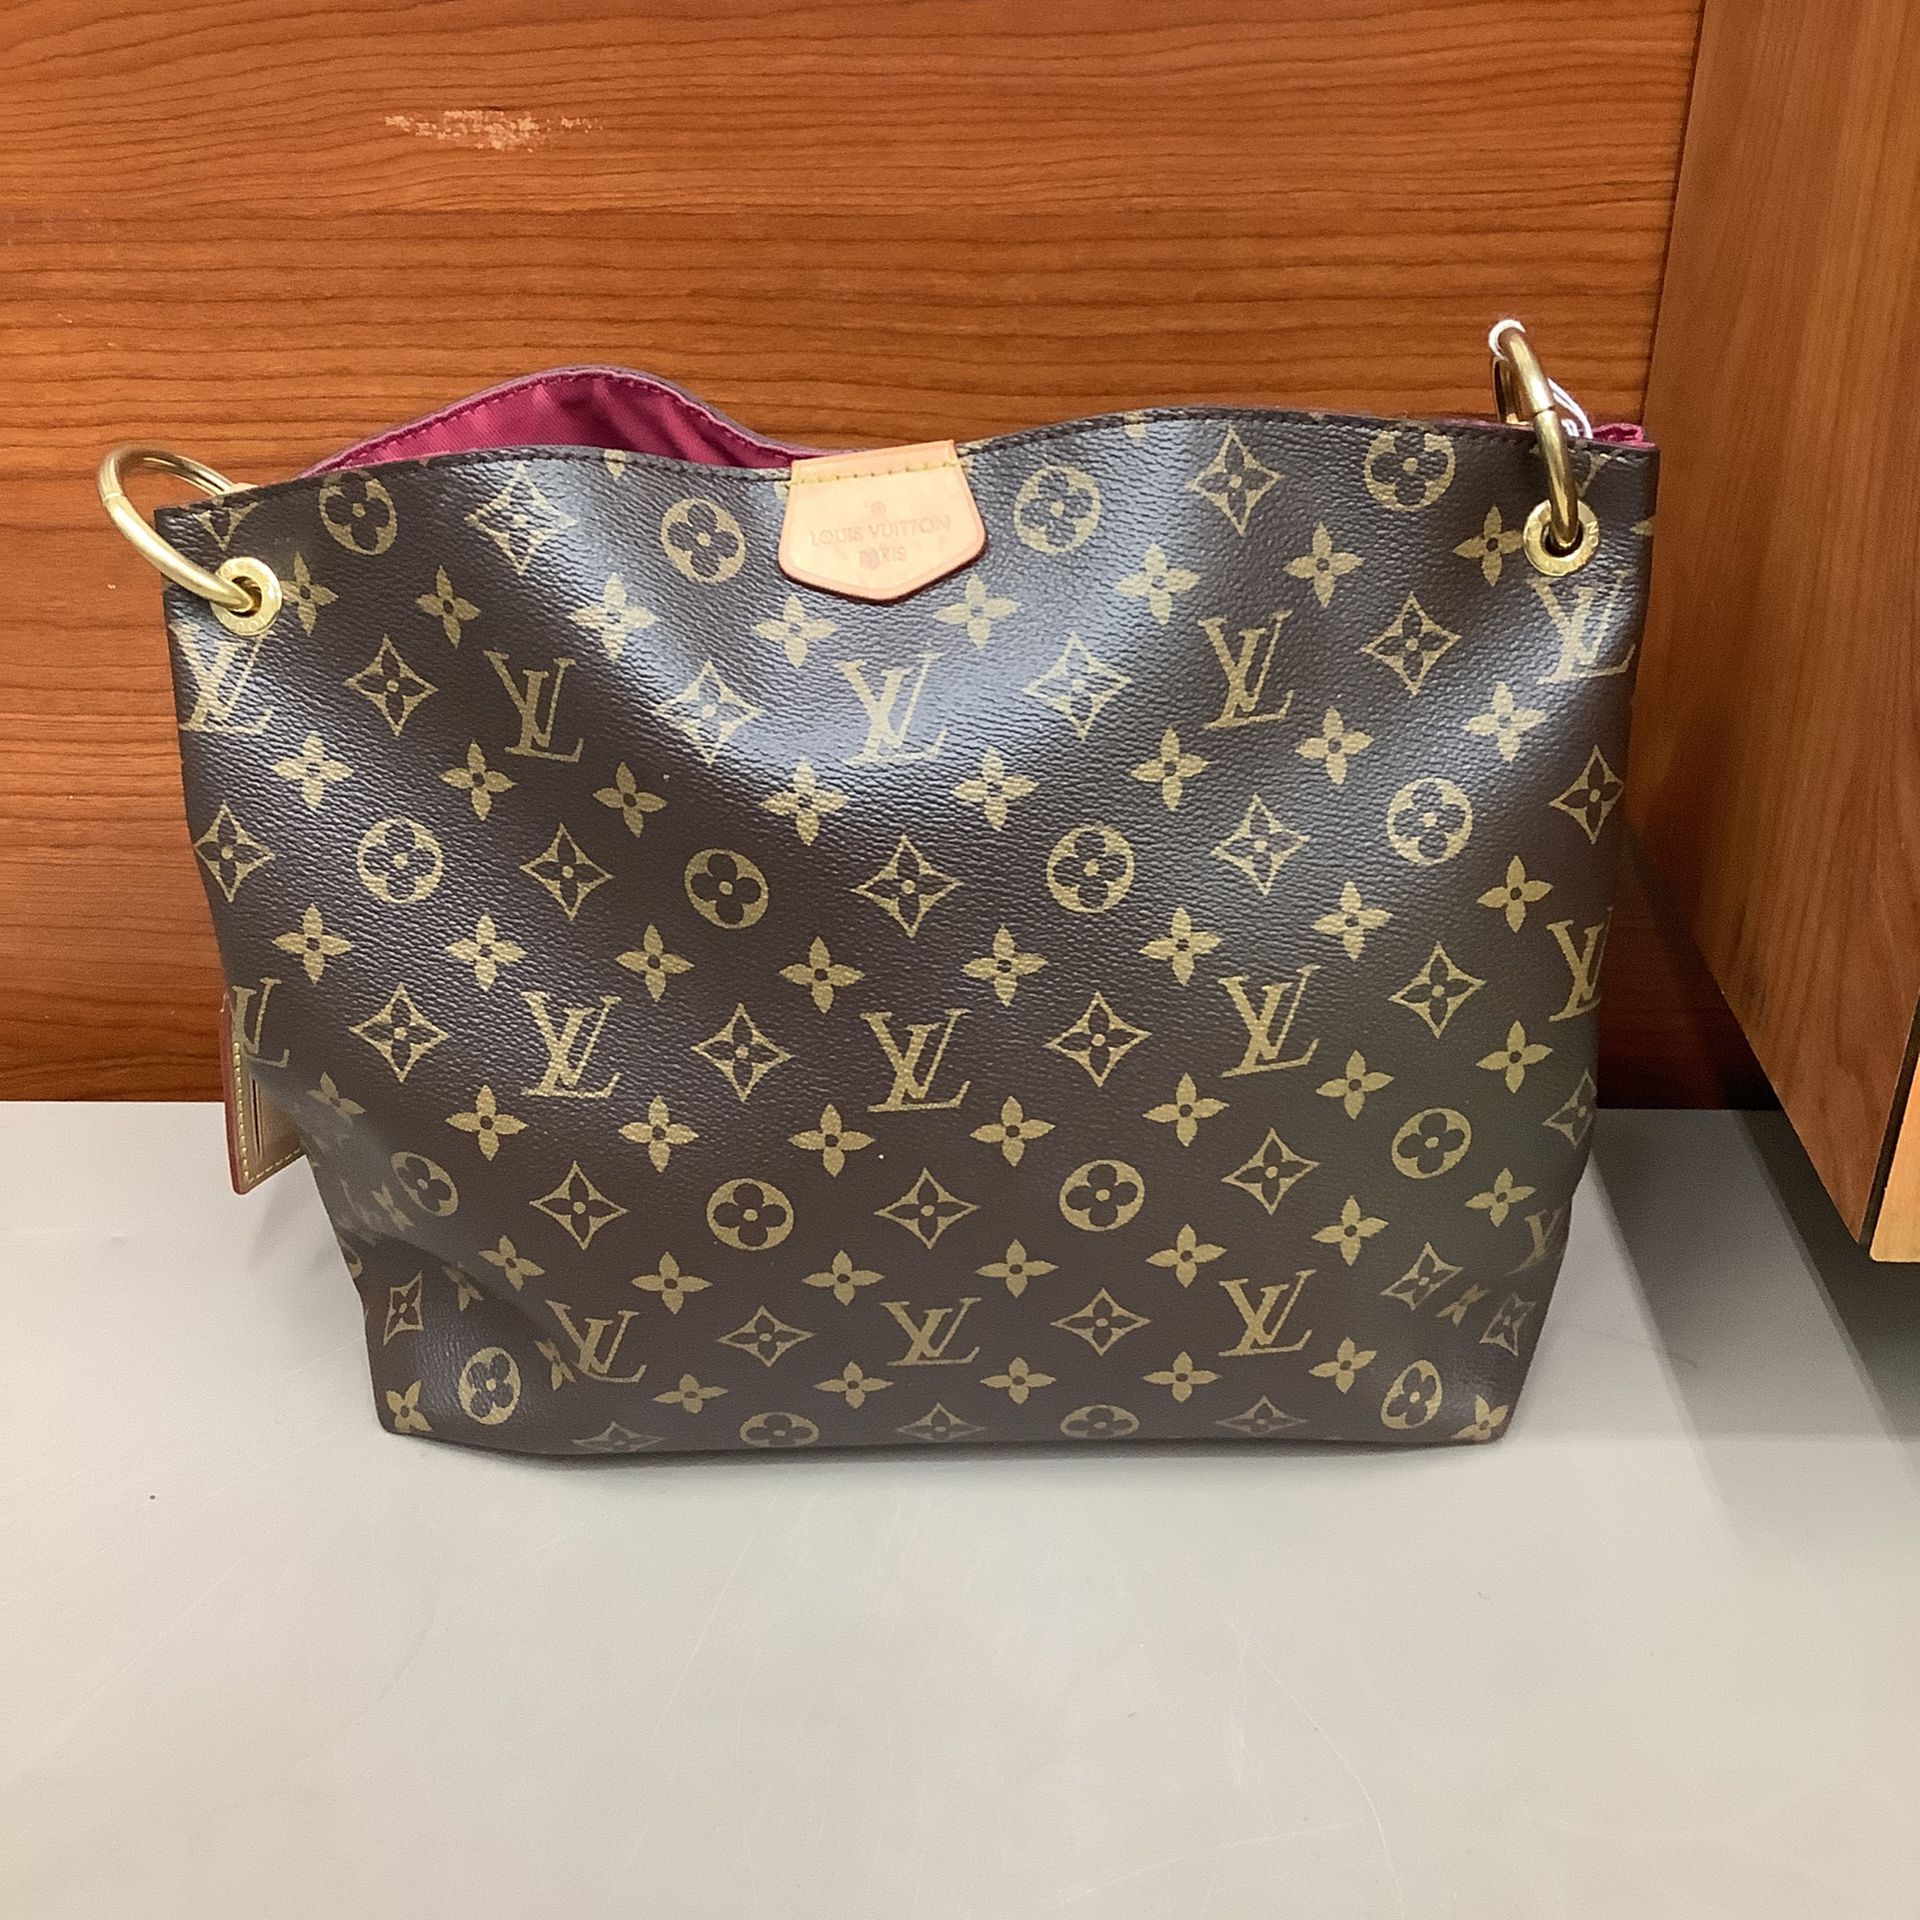 Louis Vuitton Graceful Mm Bag for Sale in New York, NY - OfferUp